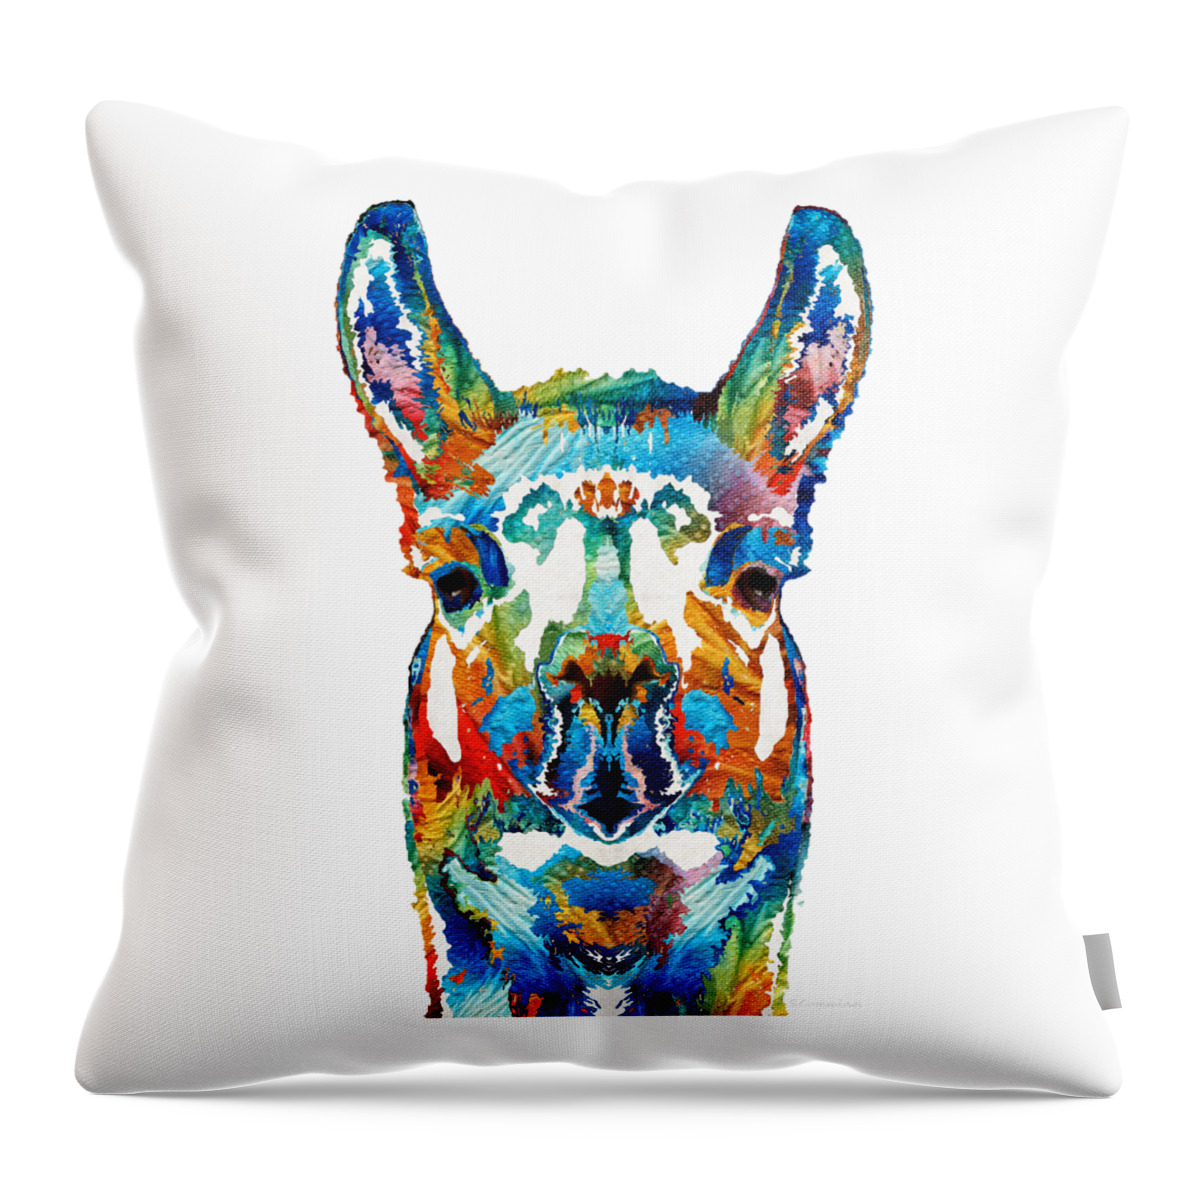 Llama Throw Pillow featuring the painting Colorful Llama Art - The Prince - By Sharon Cummings by Sharon Cummings